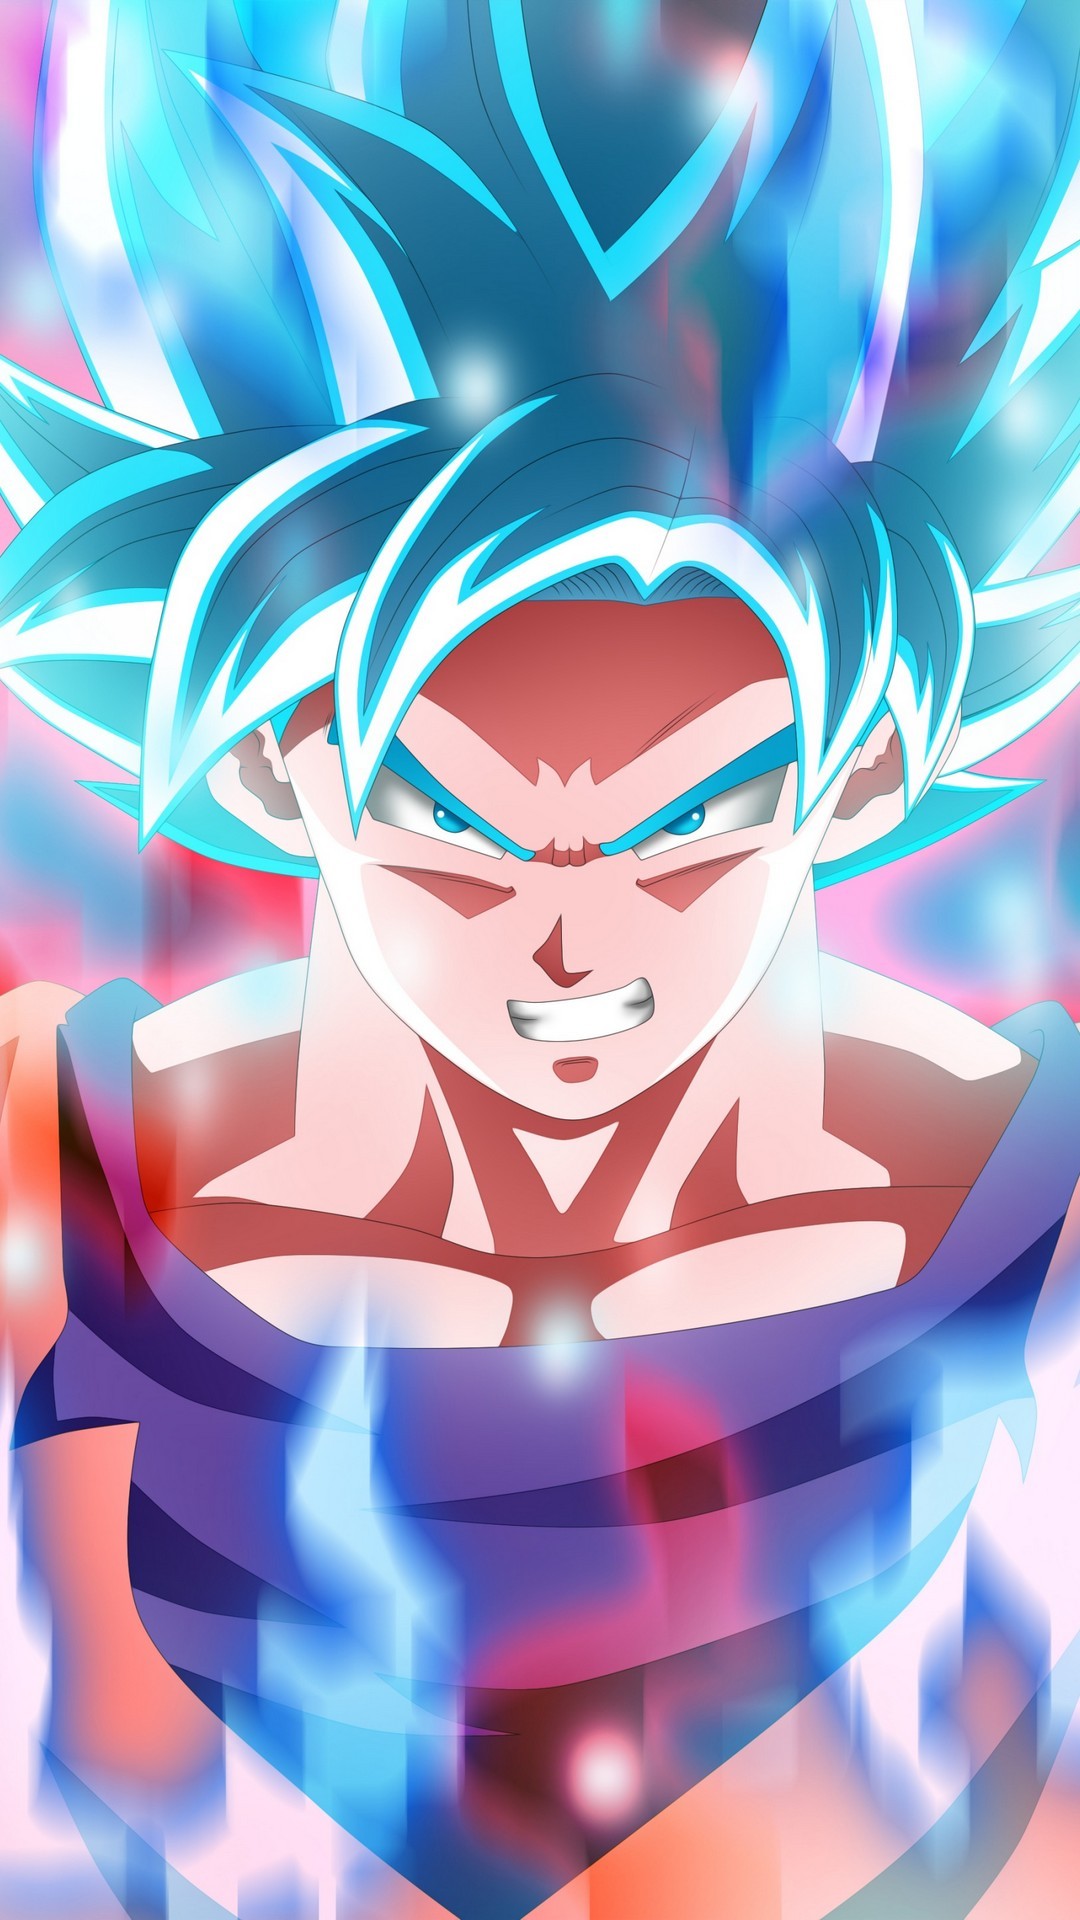 Goku SSJ Blue Android Wallpaper with HD resolution 1080x1920